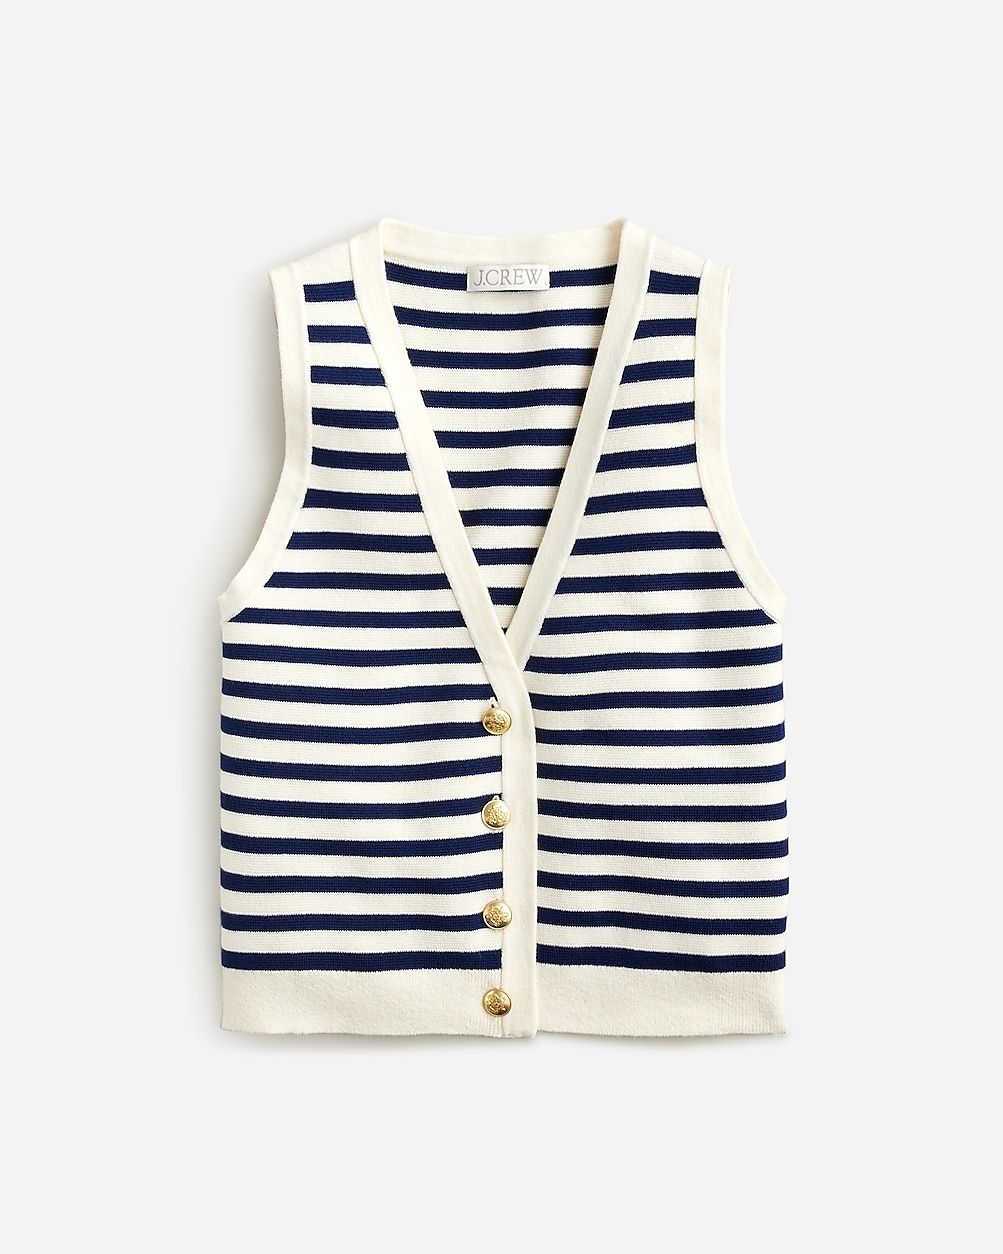 top rated4.6(52 REVIEWS)Emilie sweater-vest in stripe$98.0030% off full price with code SHOP30Nat... | J.Crew US